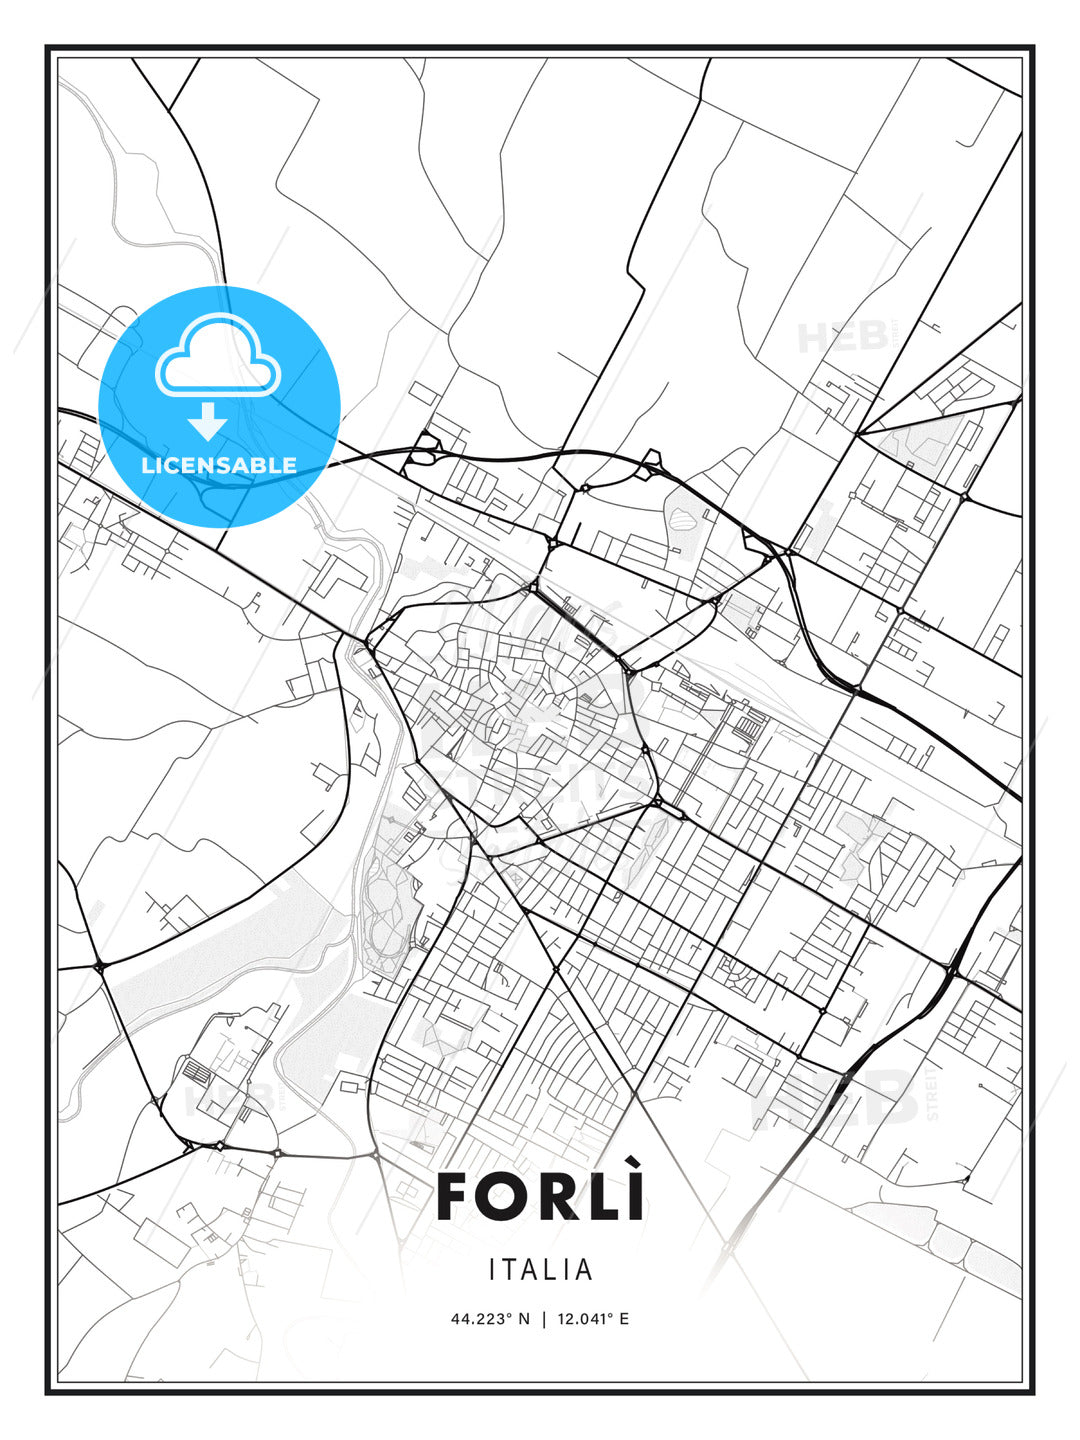 Forlì, Italy, Modern Print Template in Various Formats - HEBSTREITS Sketches